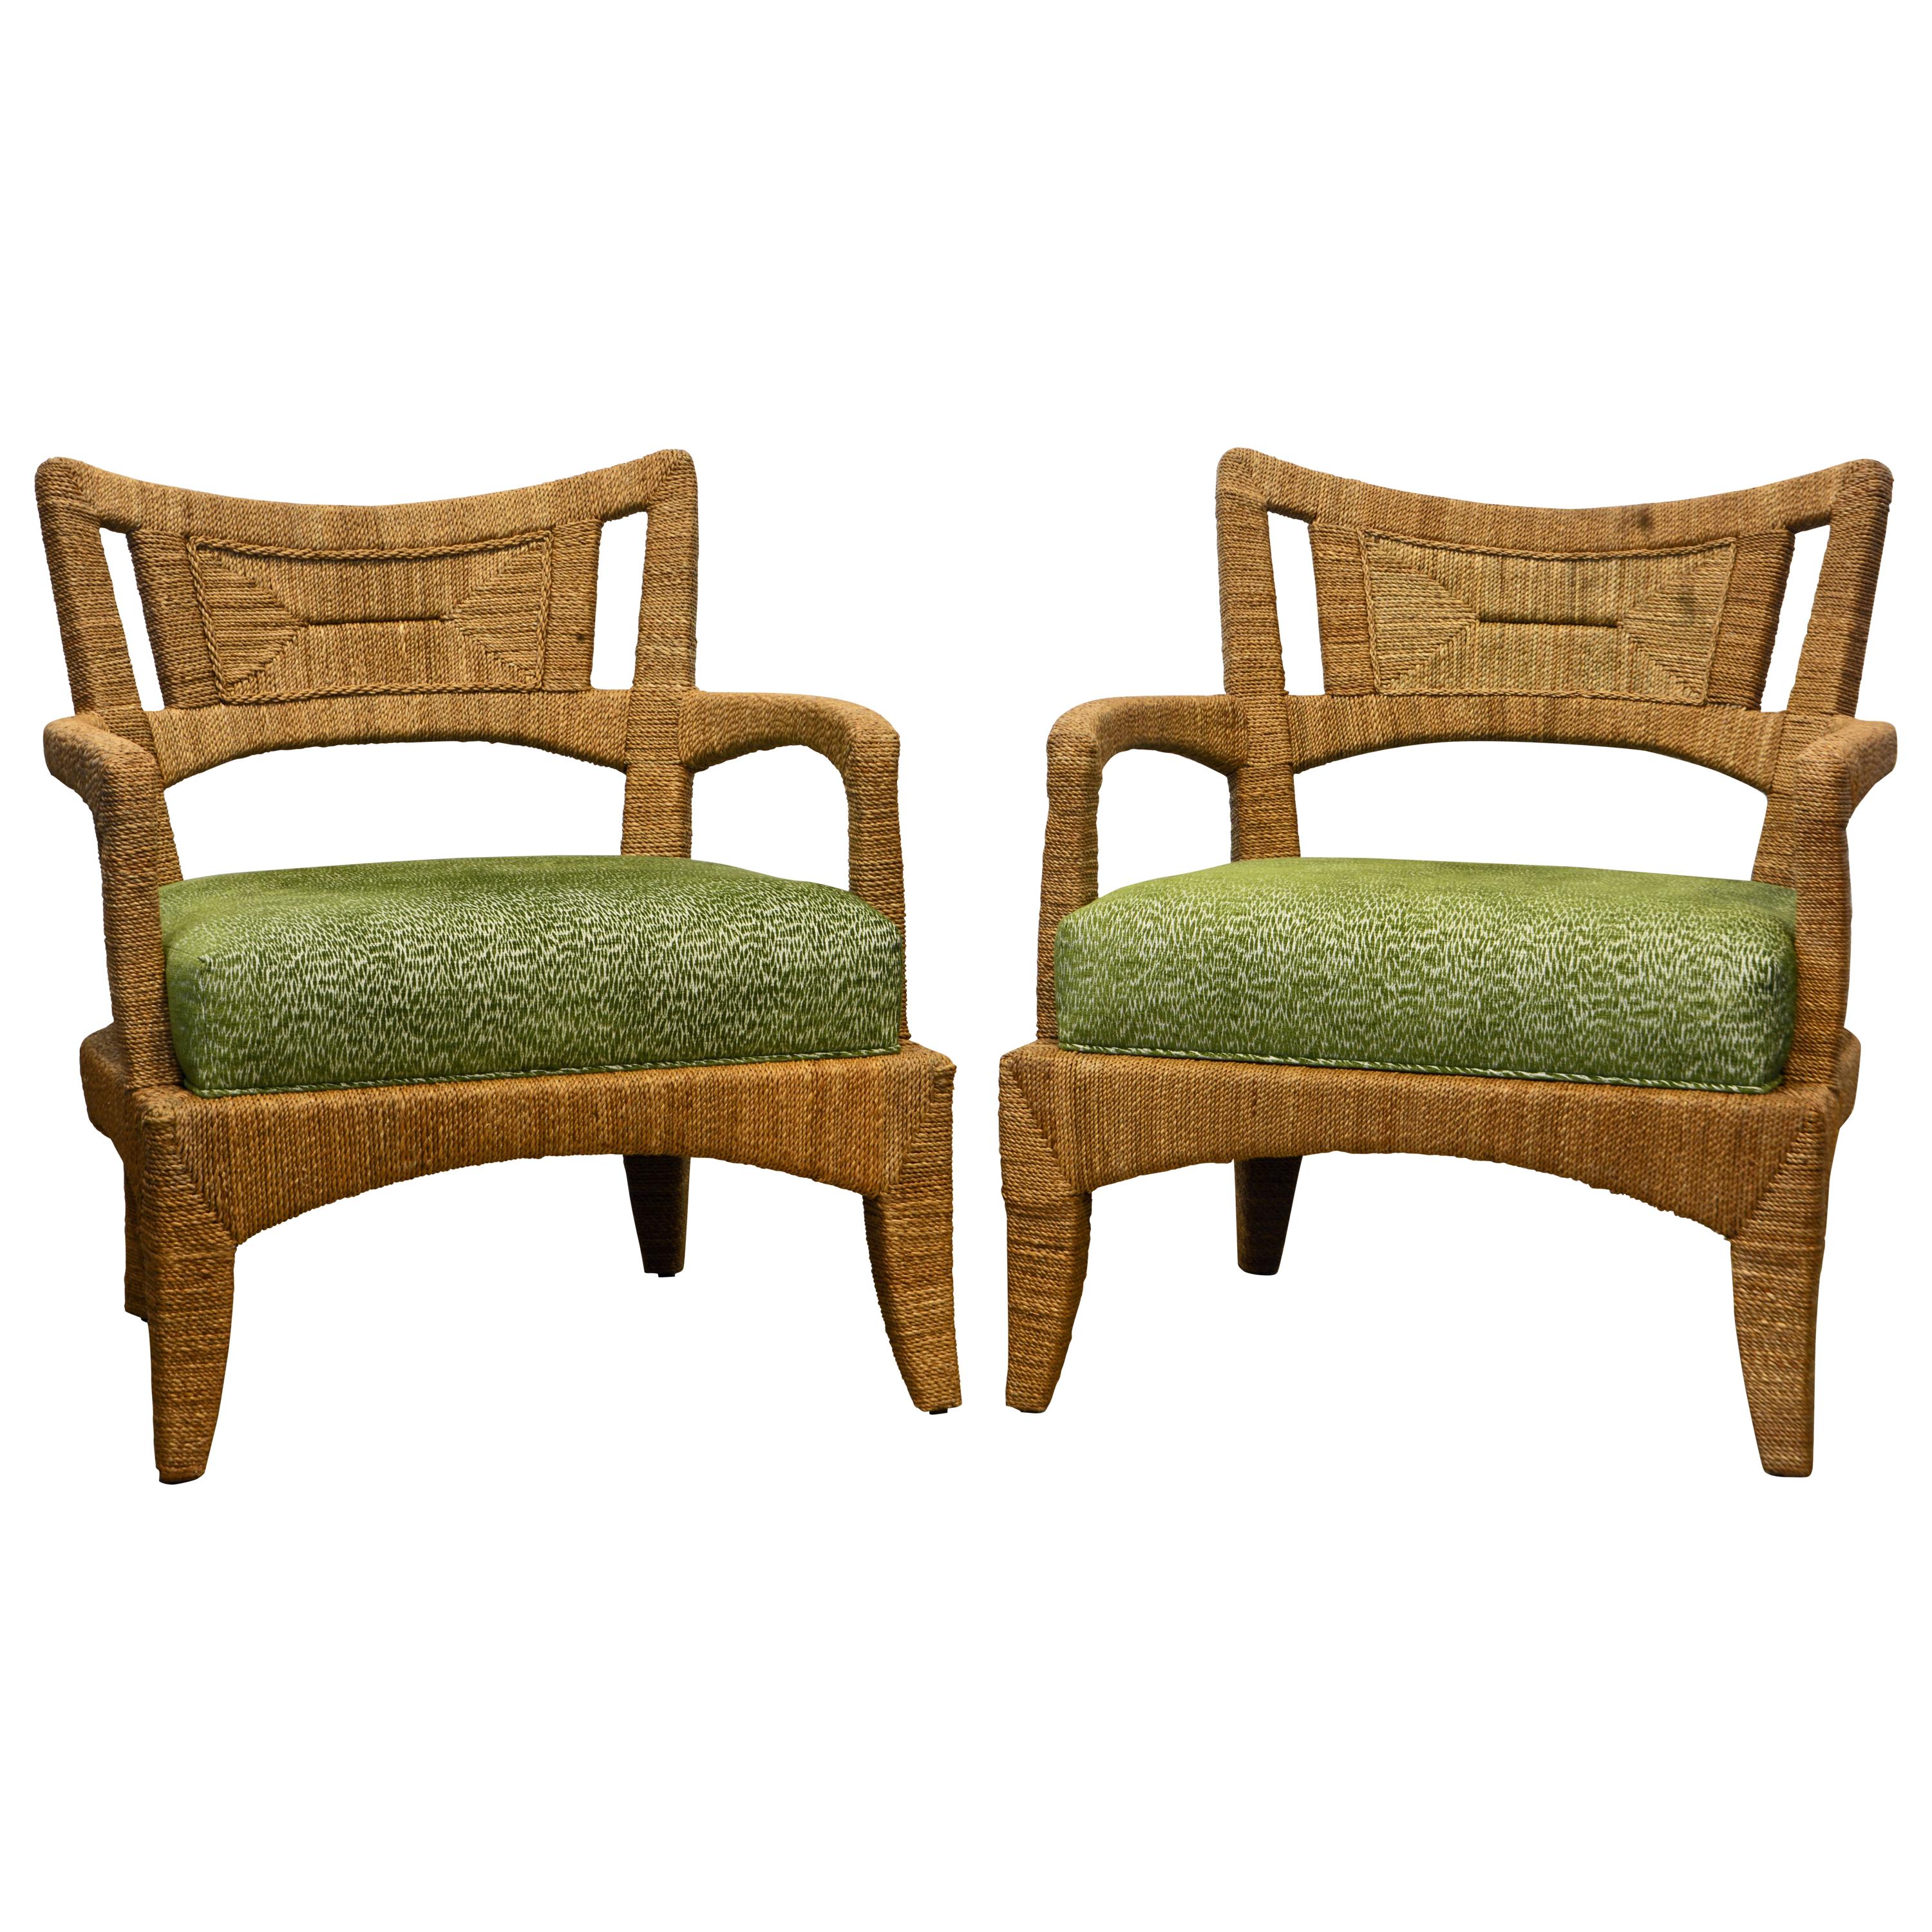 Pair of Vintage Palecek Woven Natural Seagrass Fiber Lounge Chairs and Cushions